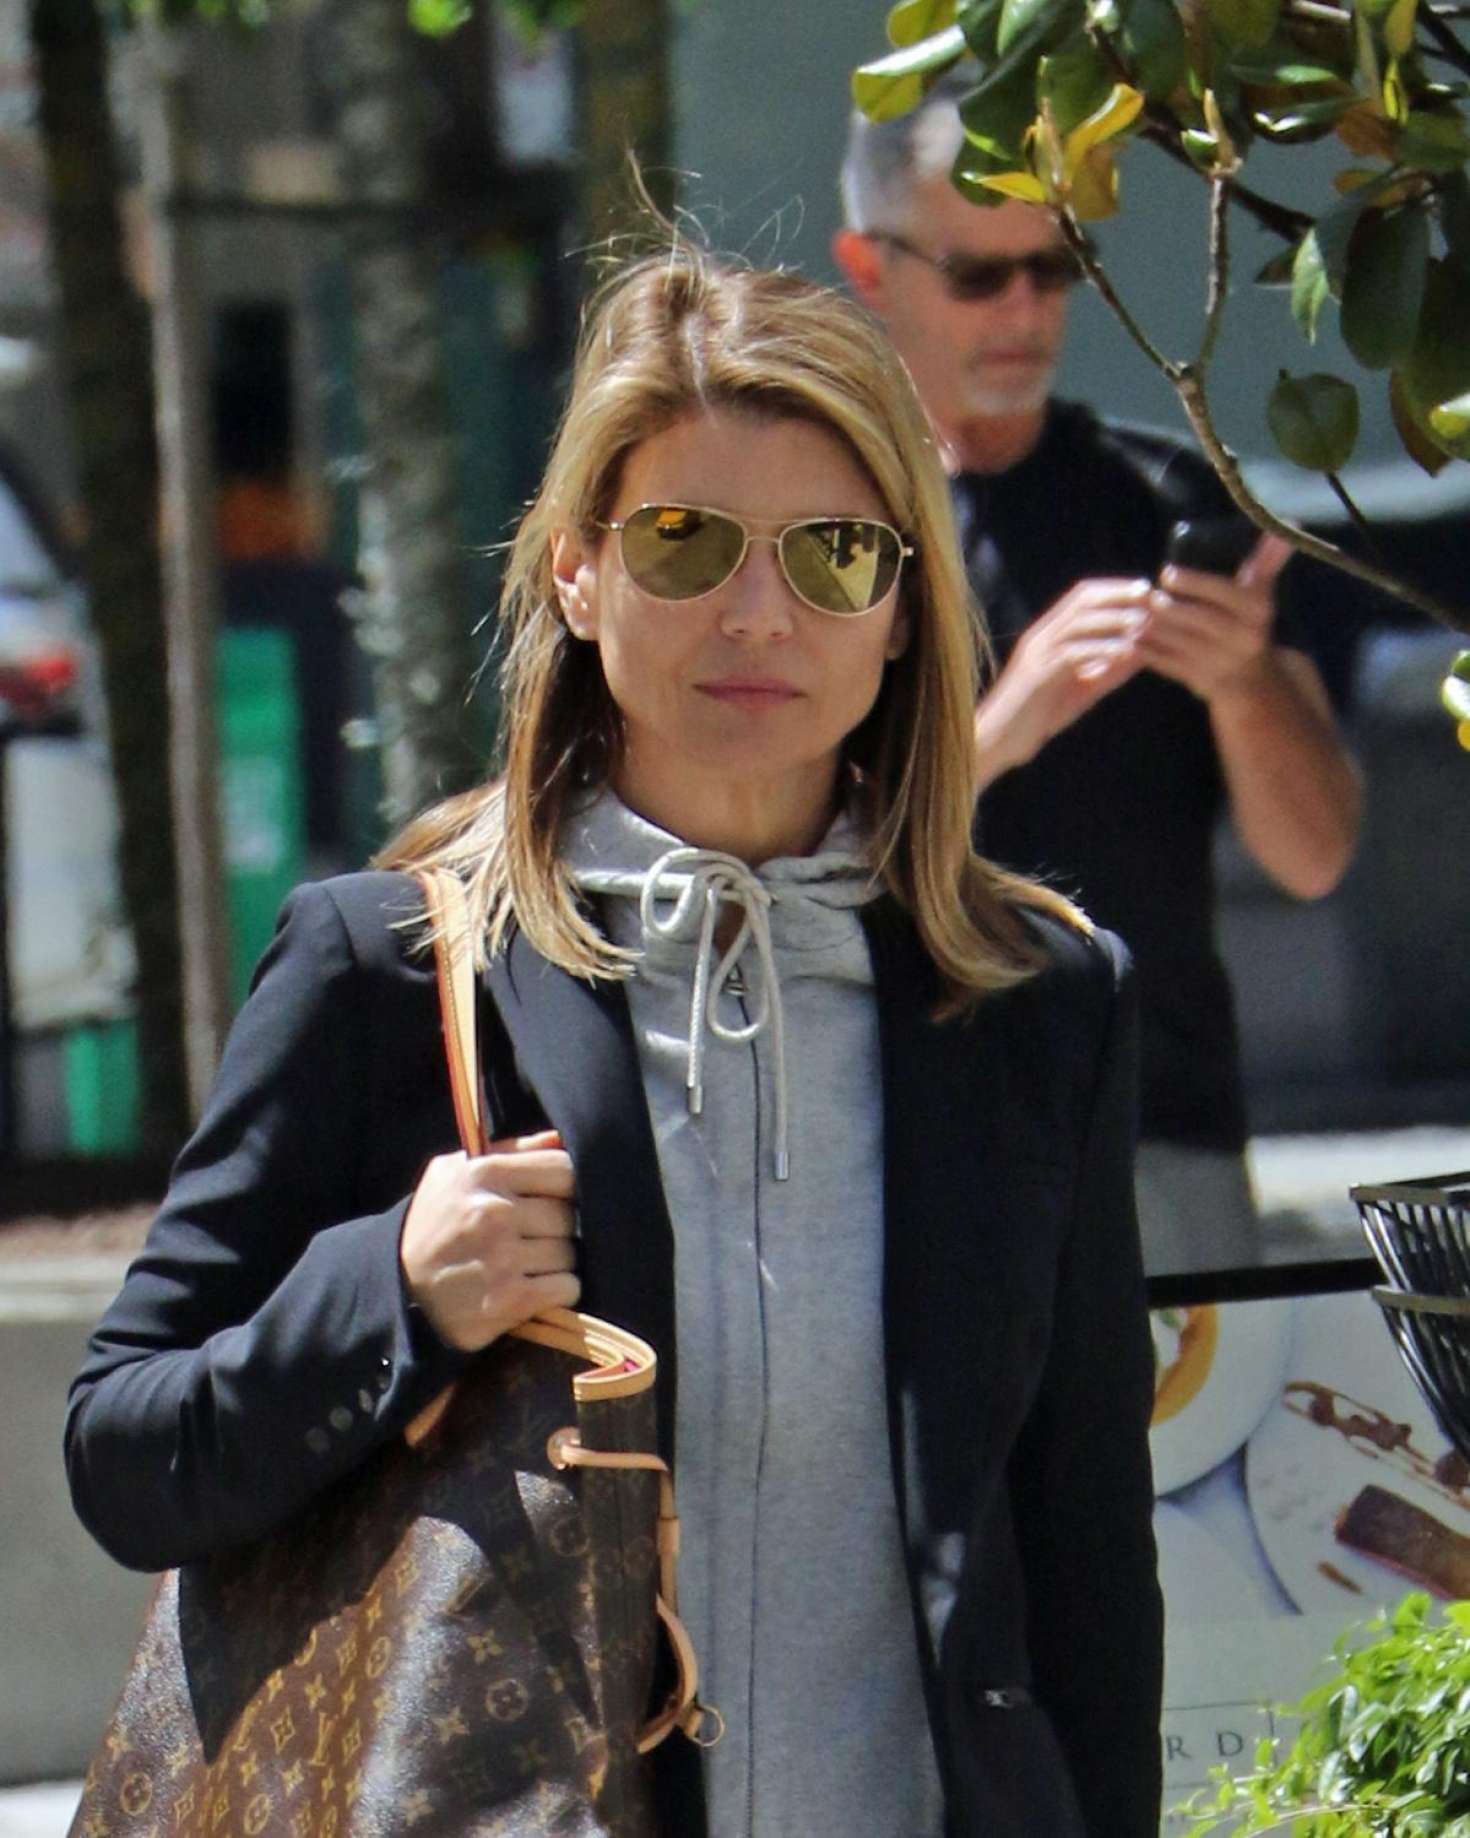 Lori Loughlin out in Vancouver